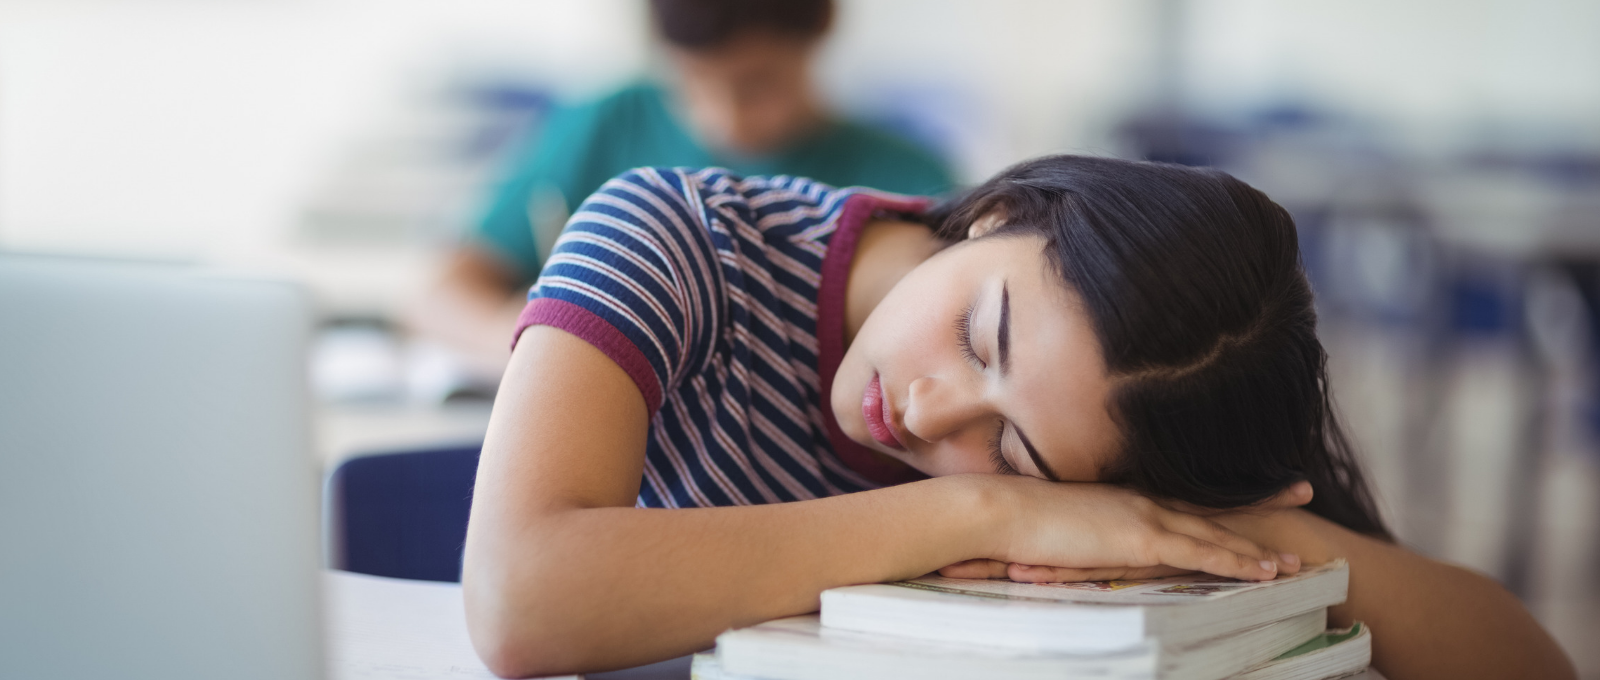 Teenager sleeping at desk on a pile of books at school